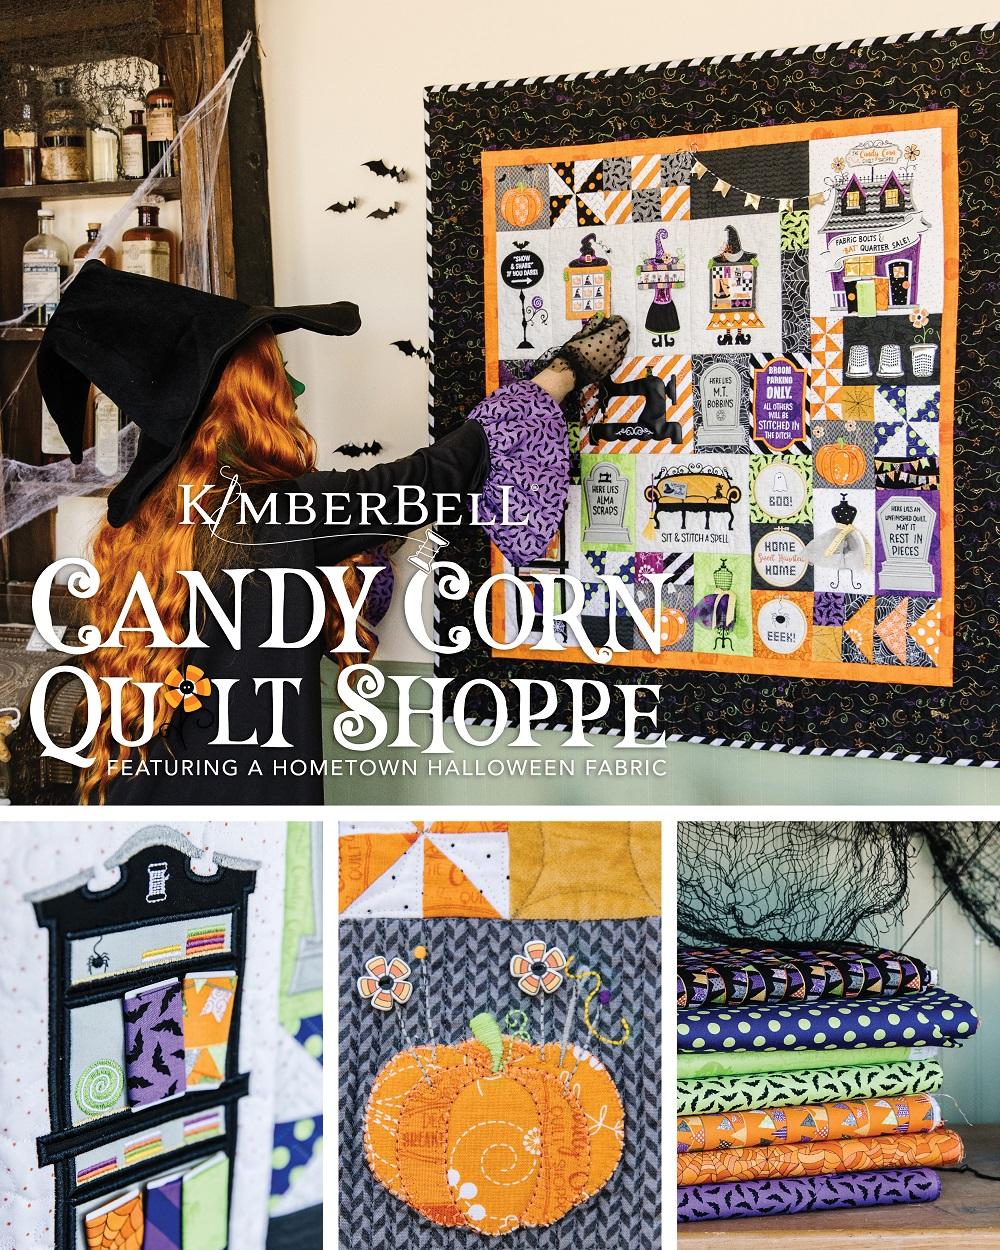 Kimberbell Candy Corn Embroidery CD/Book